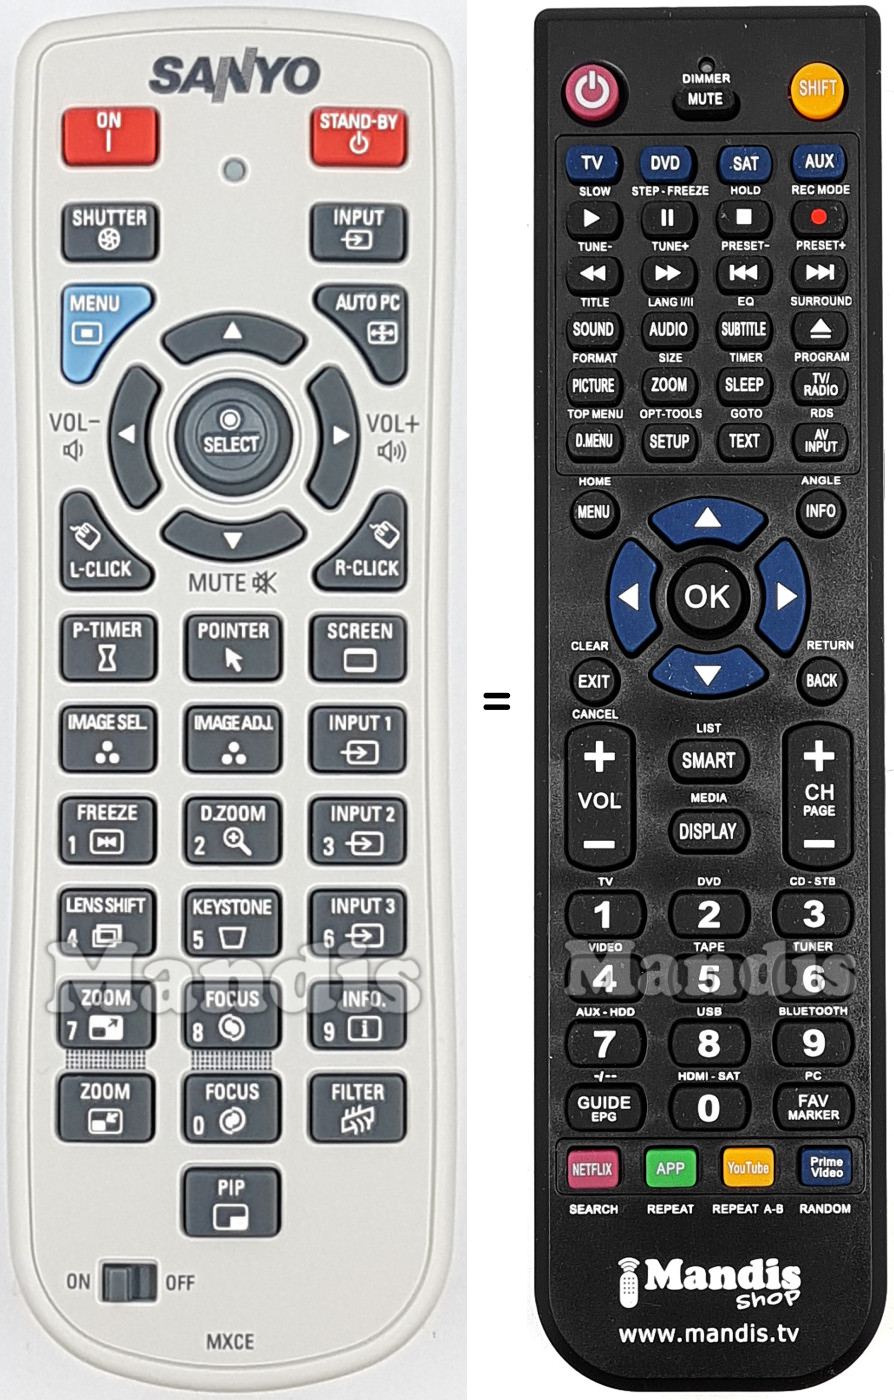 Replacement remote control Sanyo Sanyo-MXCE